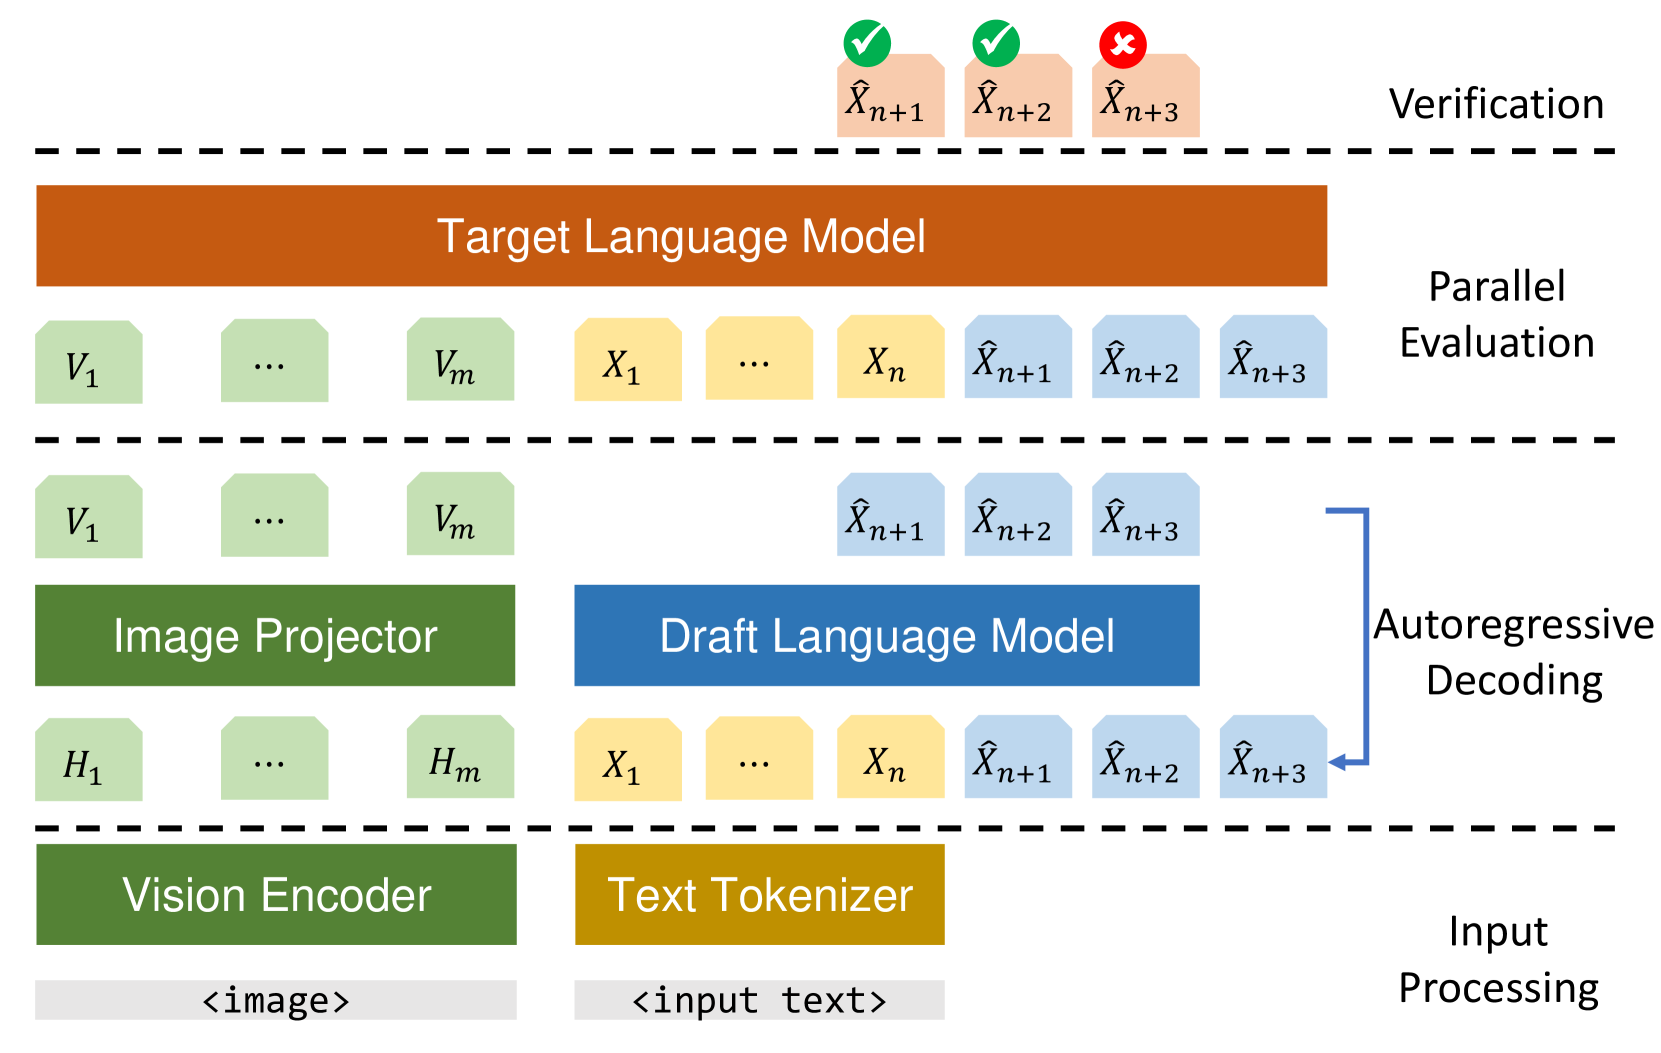 On Speculative Decoding for Multimodal Large Language Models